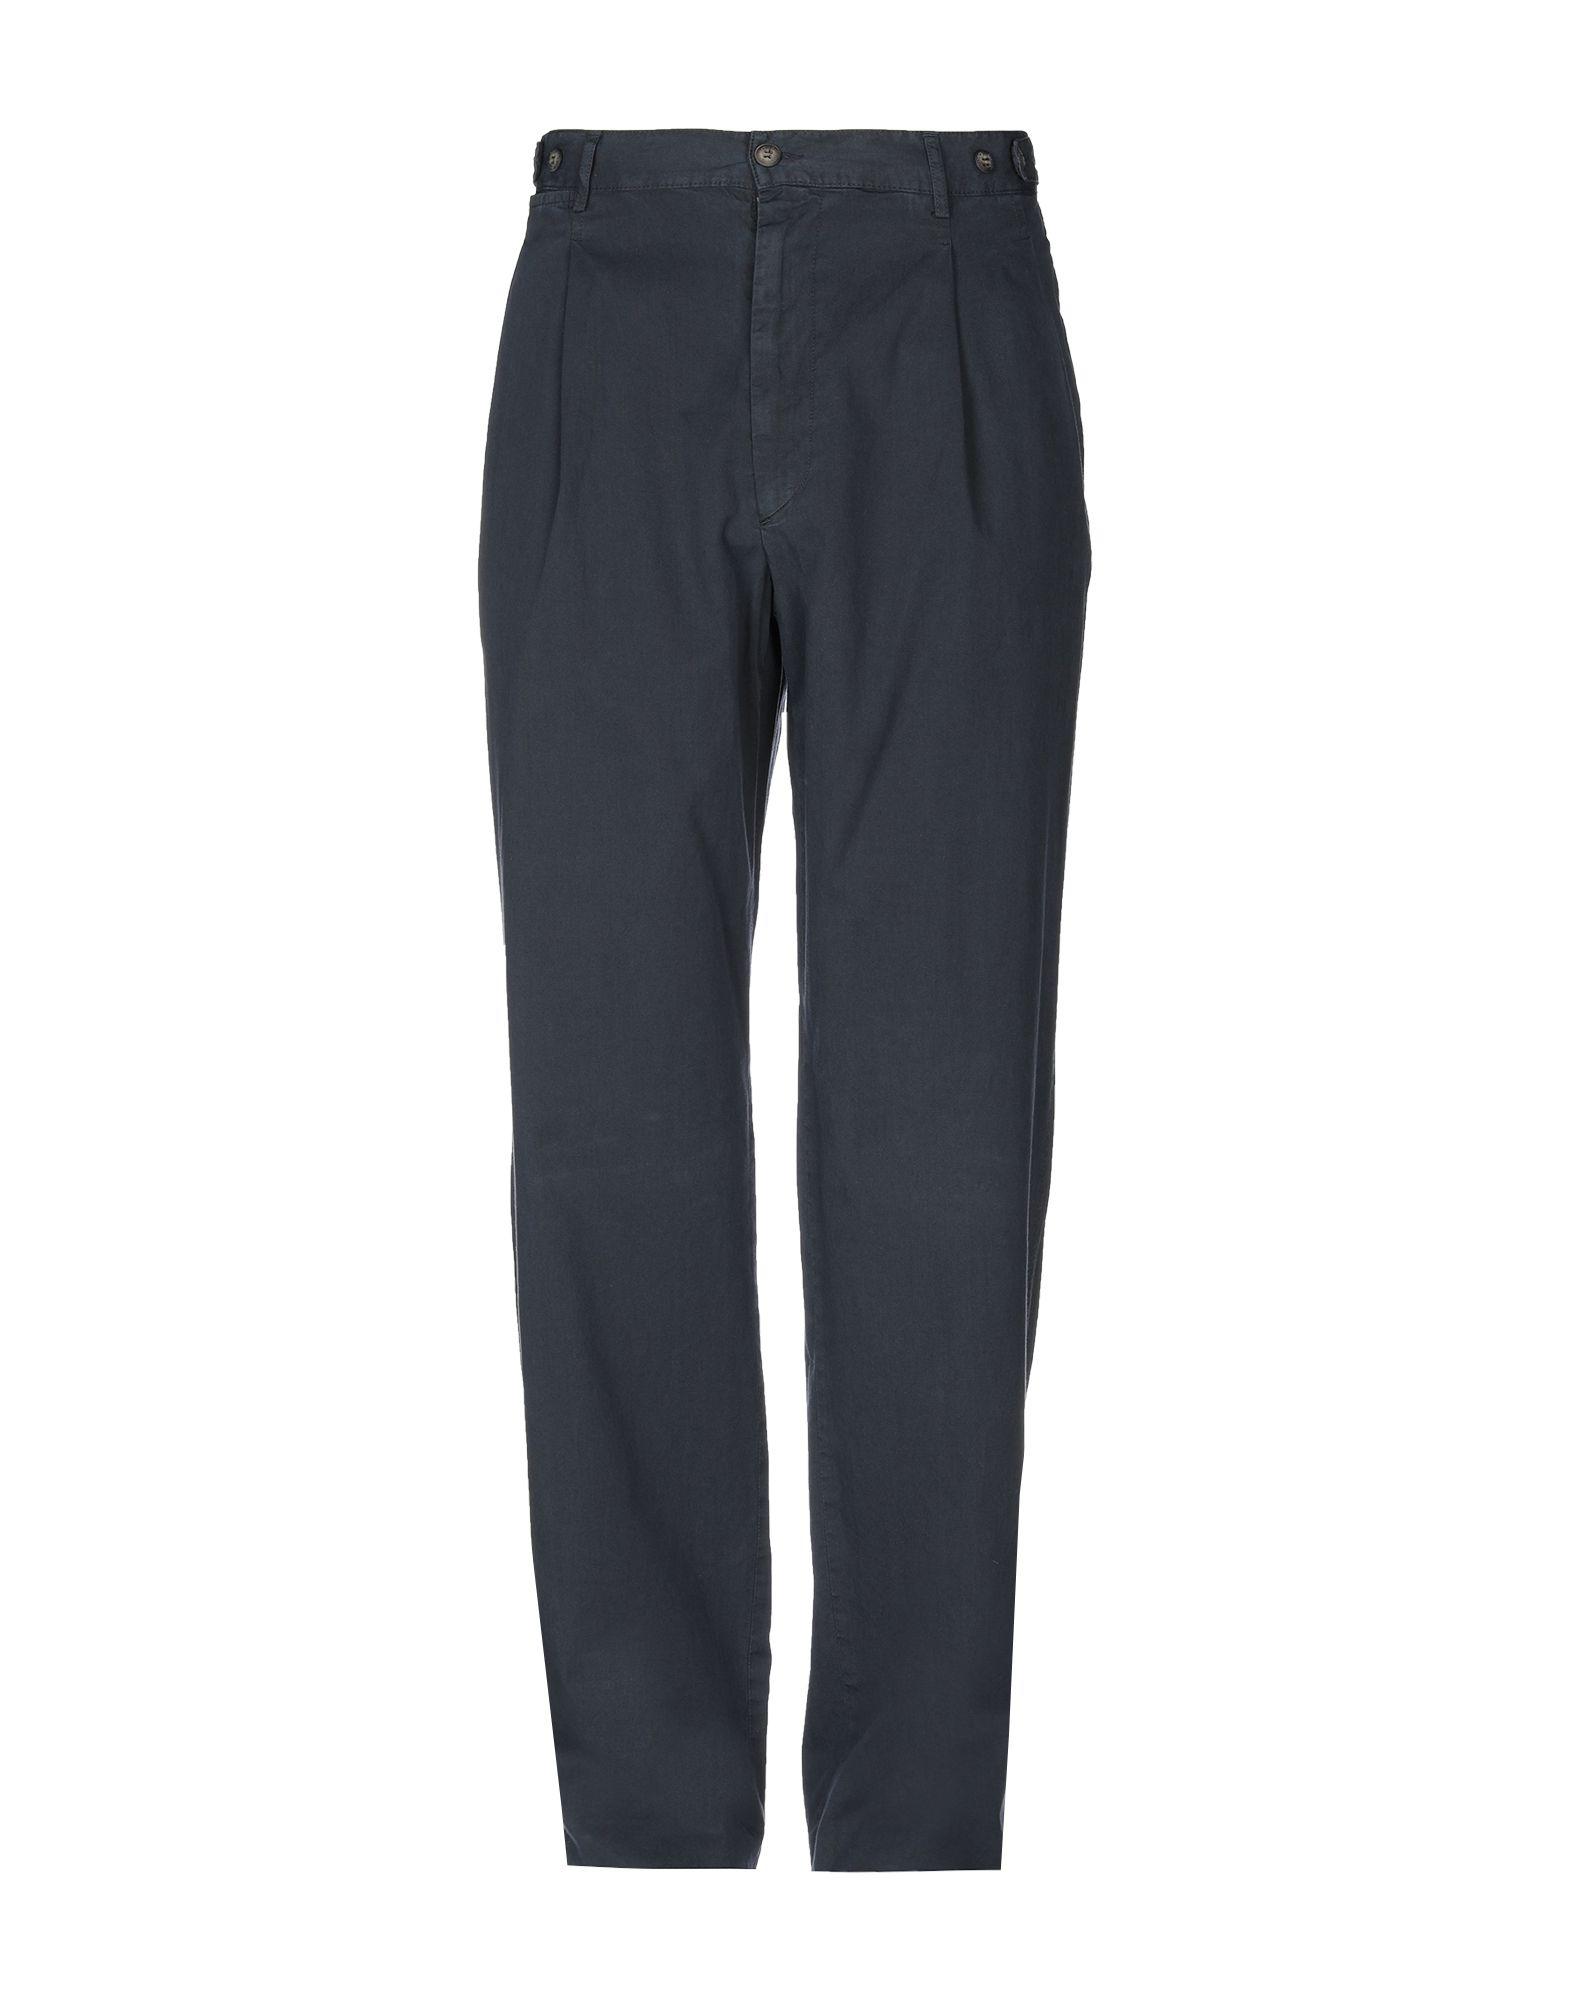 Henry Cotton's Cotton Casual Pants in Dark Blue (Blue) for Men - Lyst